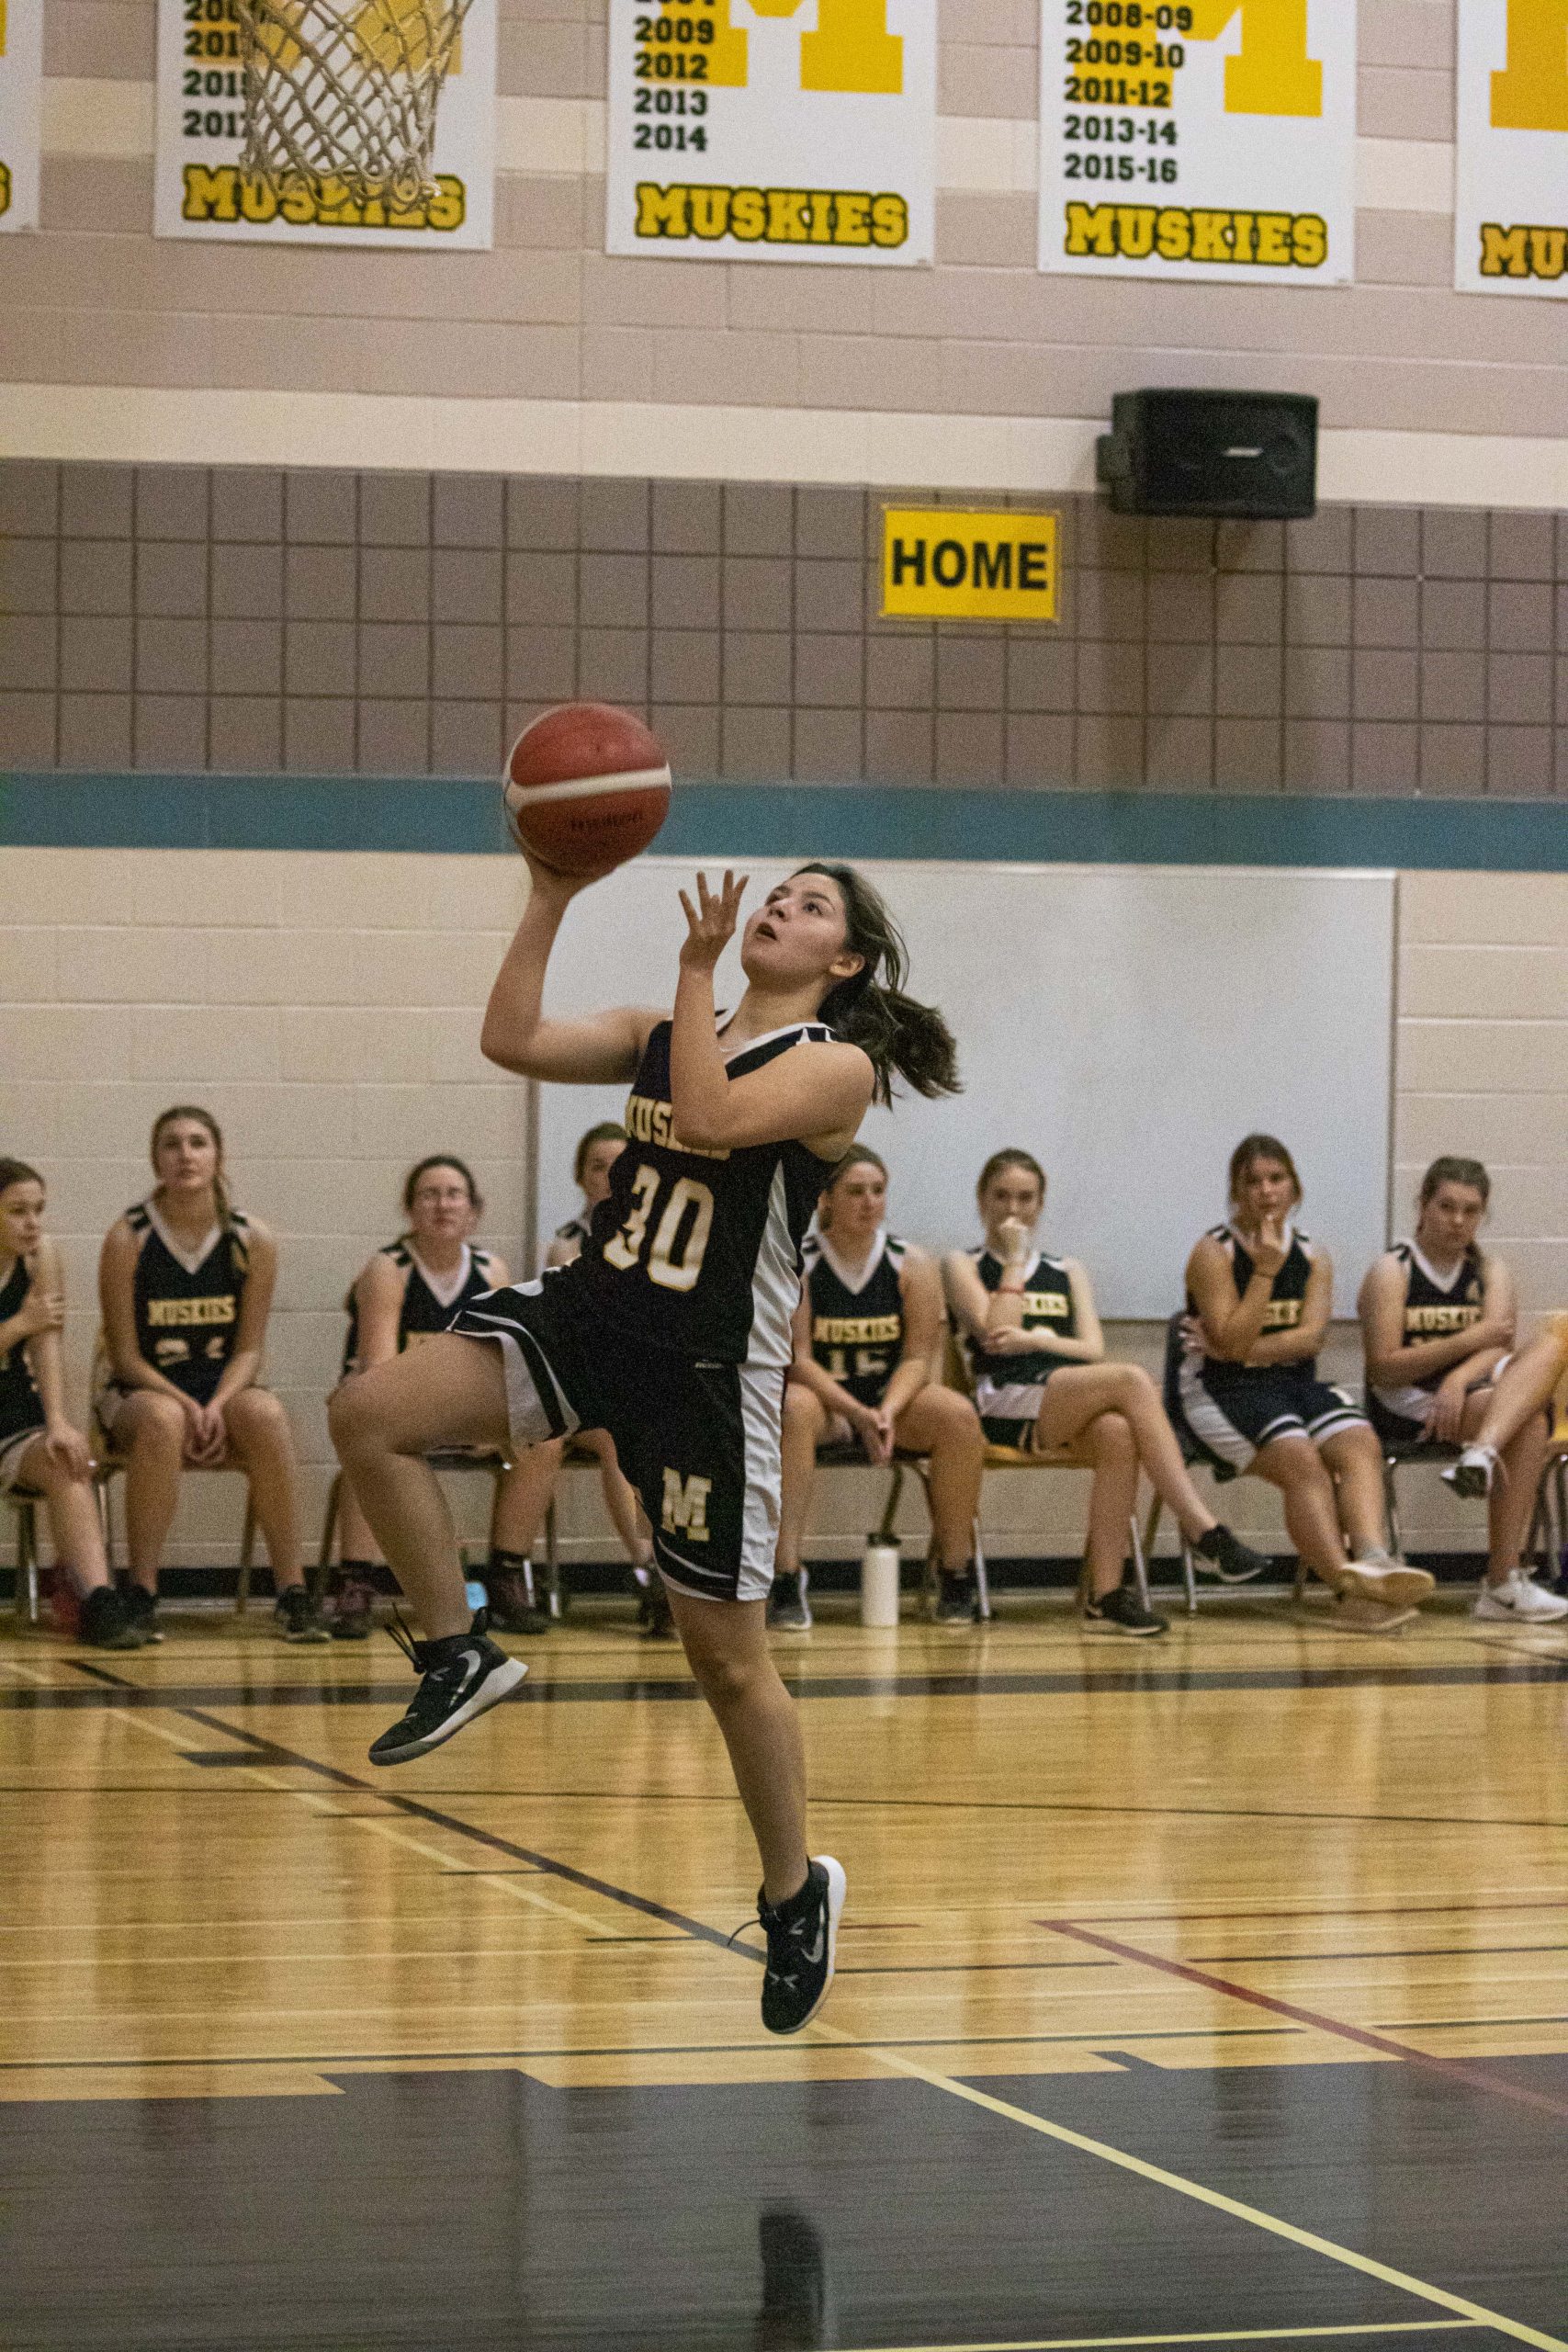 Muskie court sports wrapping up post-COVID fall season